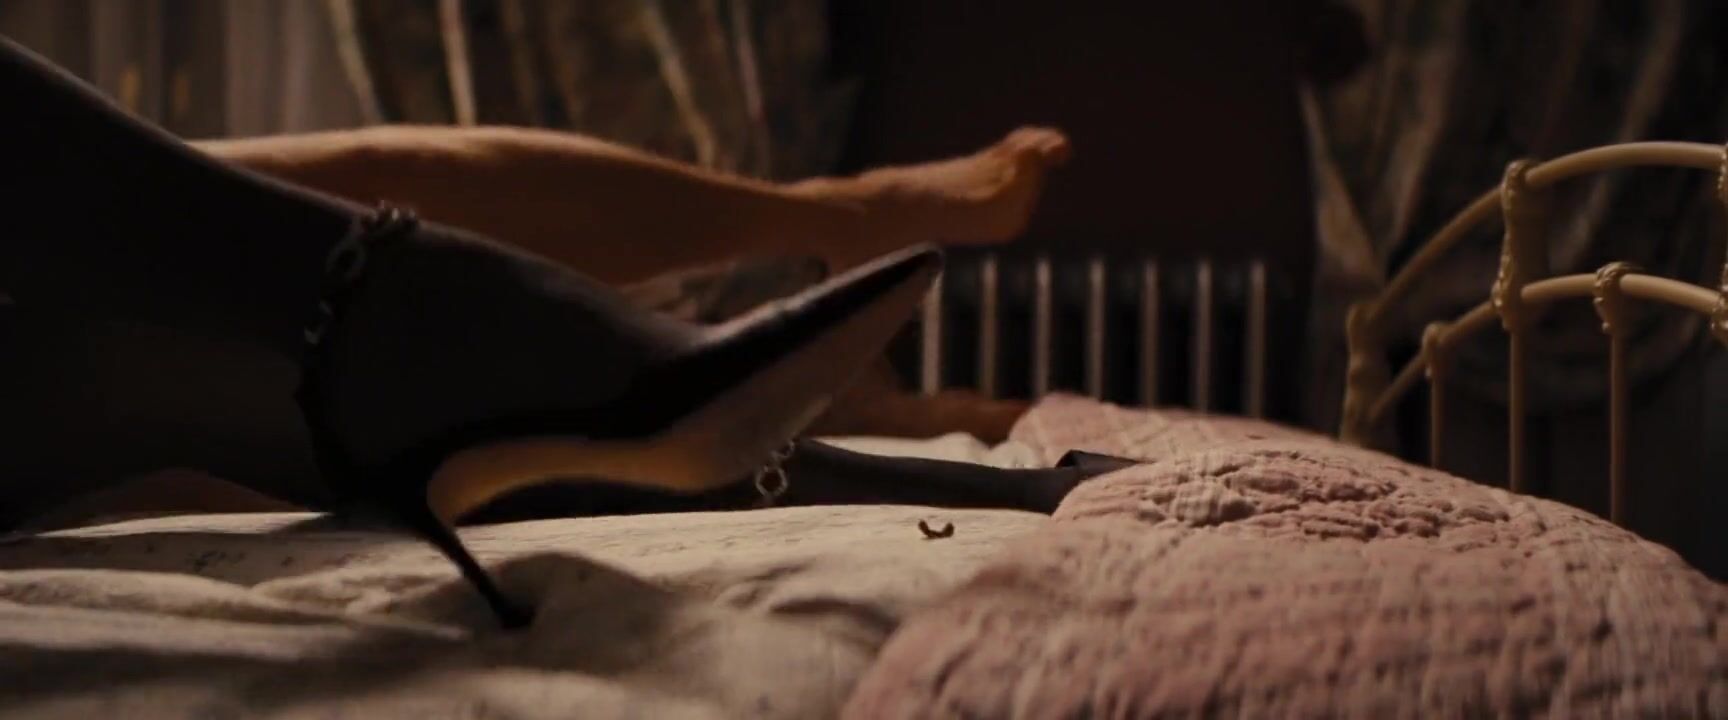 Blacks Explicit sex scene of Margot Robbie and Leonardo DiCaprio from The Wolf of Wall Street Colombian - 1